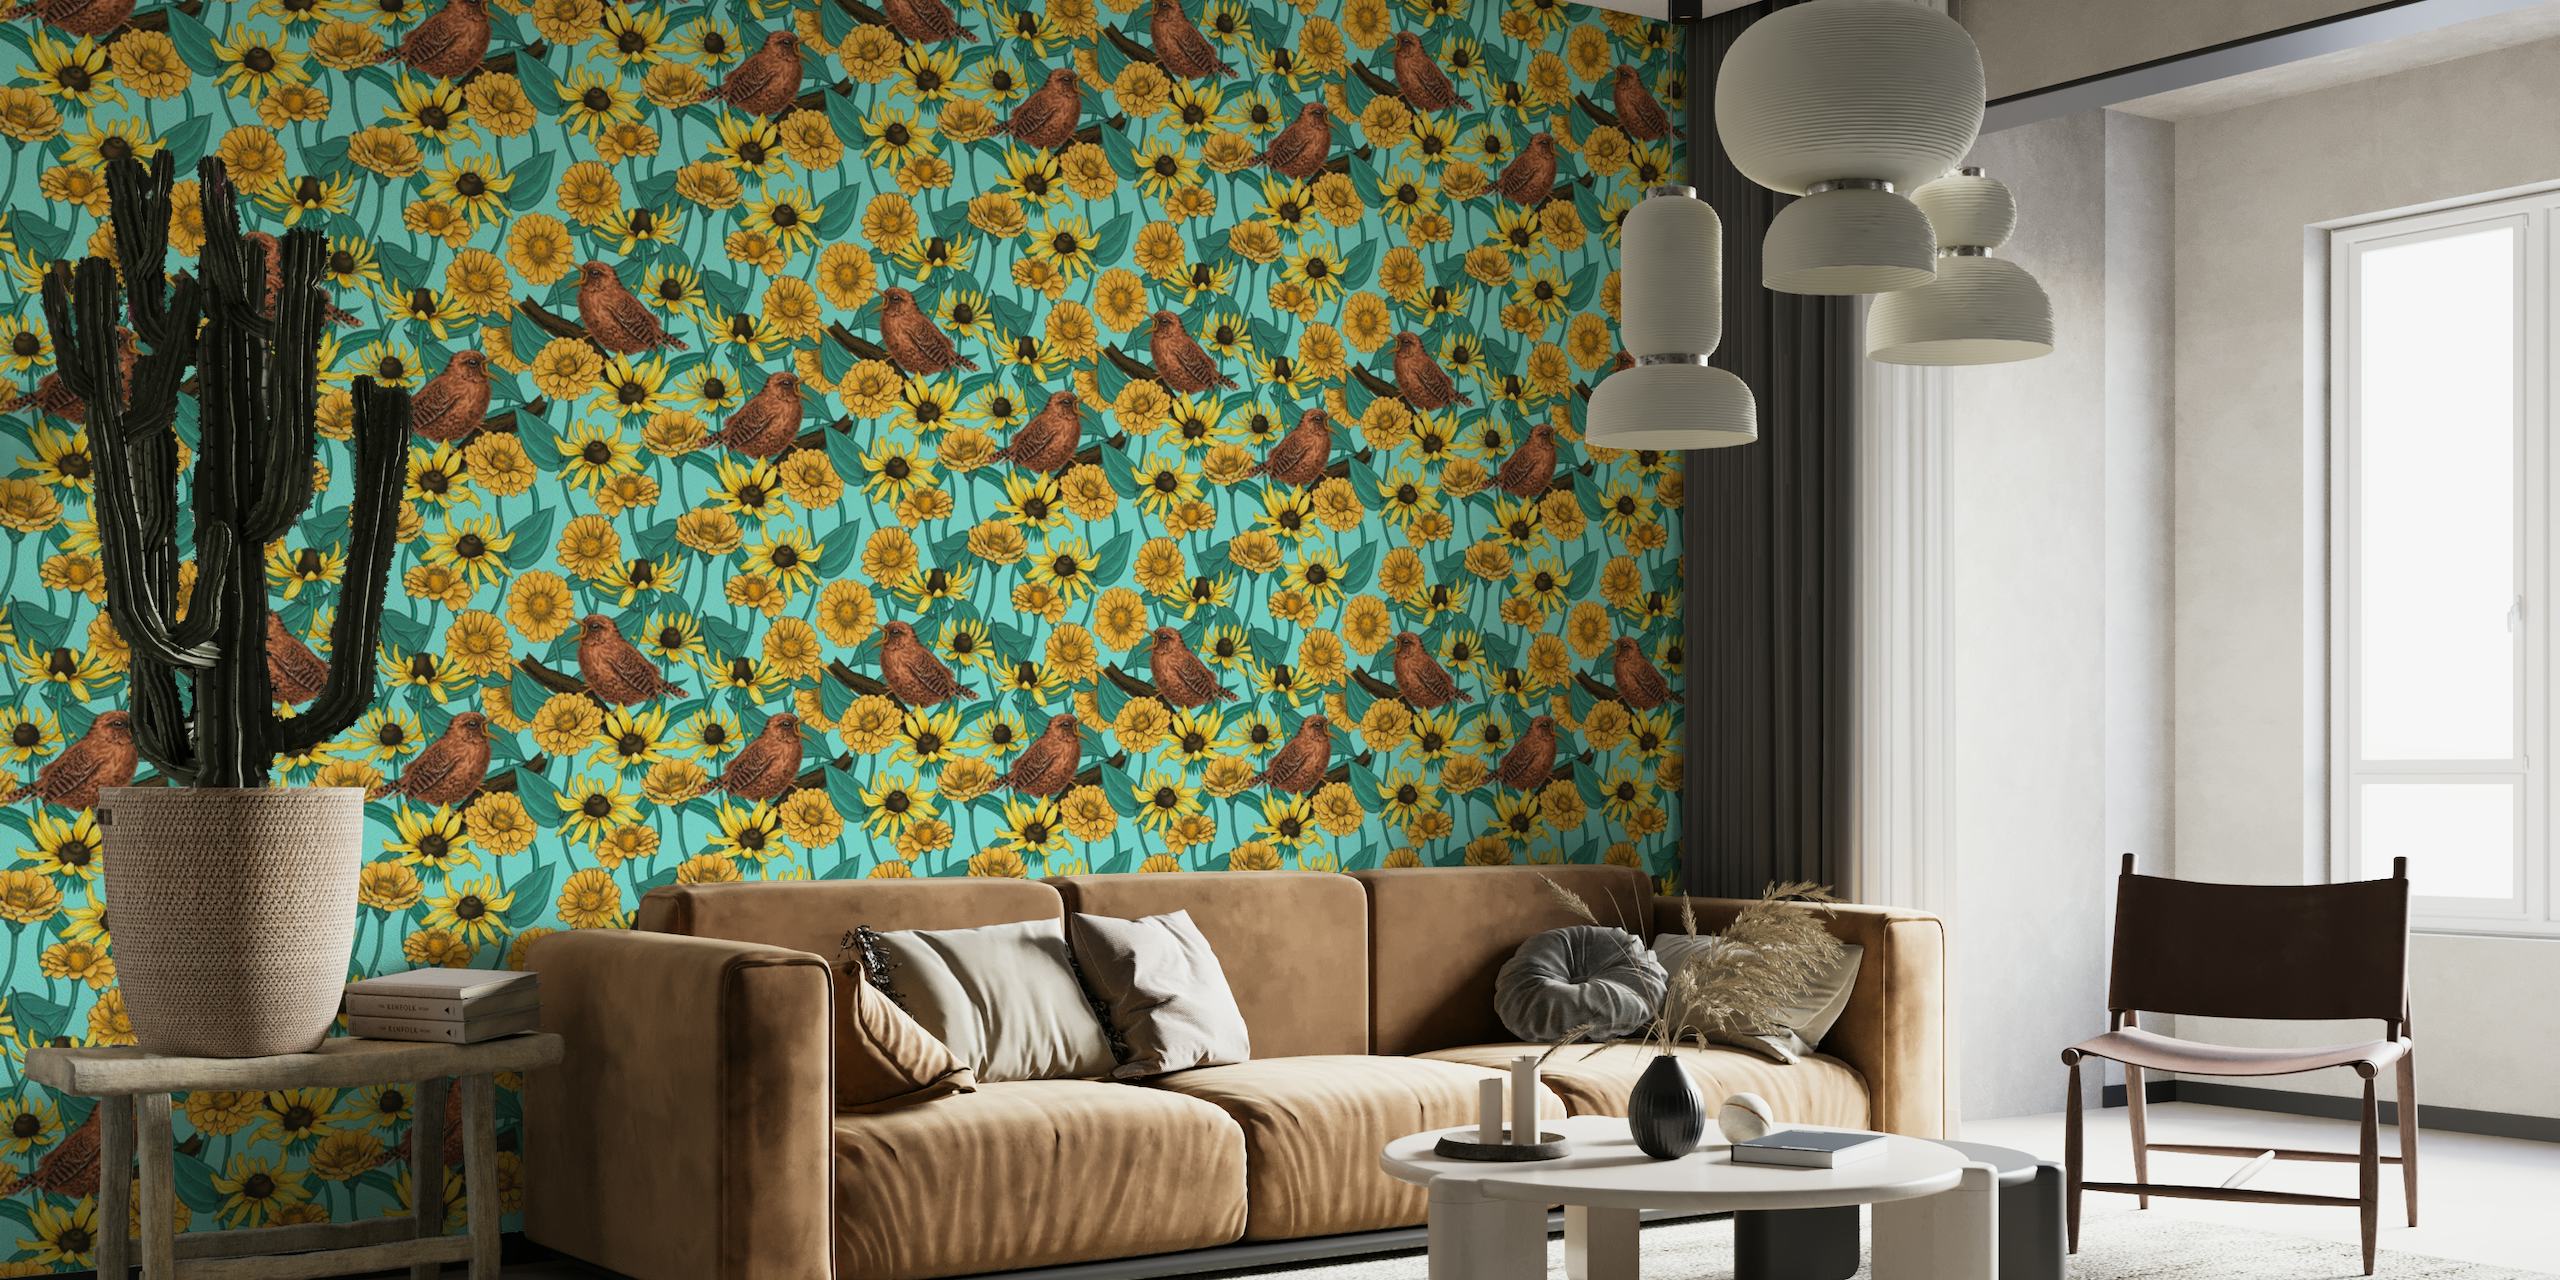 Wall mural of wrens and yellow flowers on a light blue background